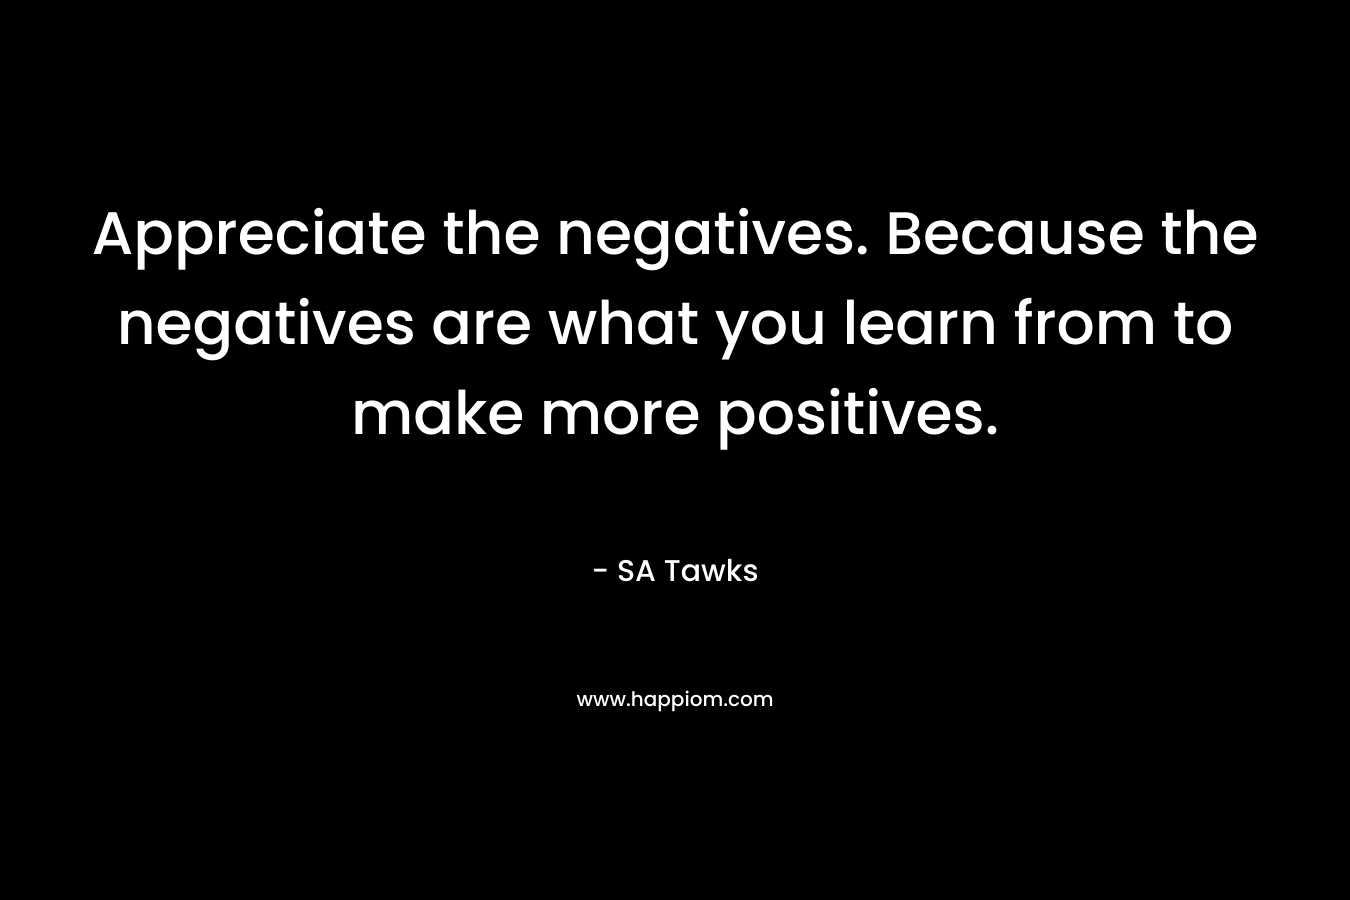 Appreciate the negatives. Because the negatives are what you learn from to make more positives. – SA Tawks